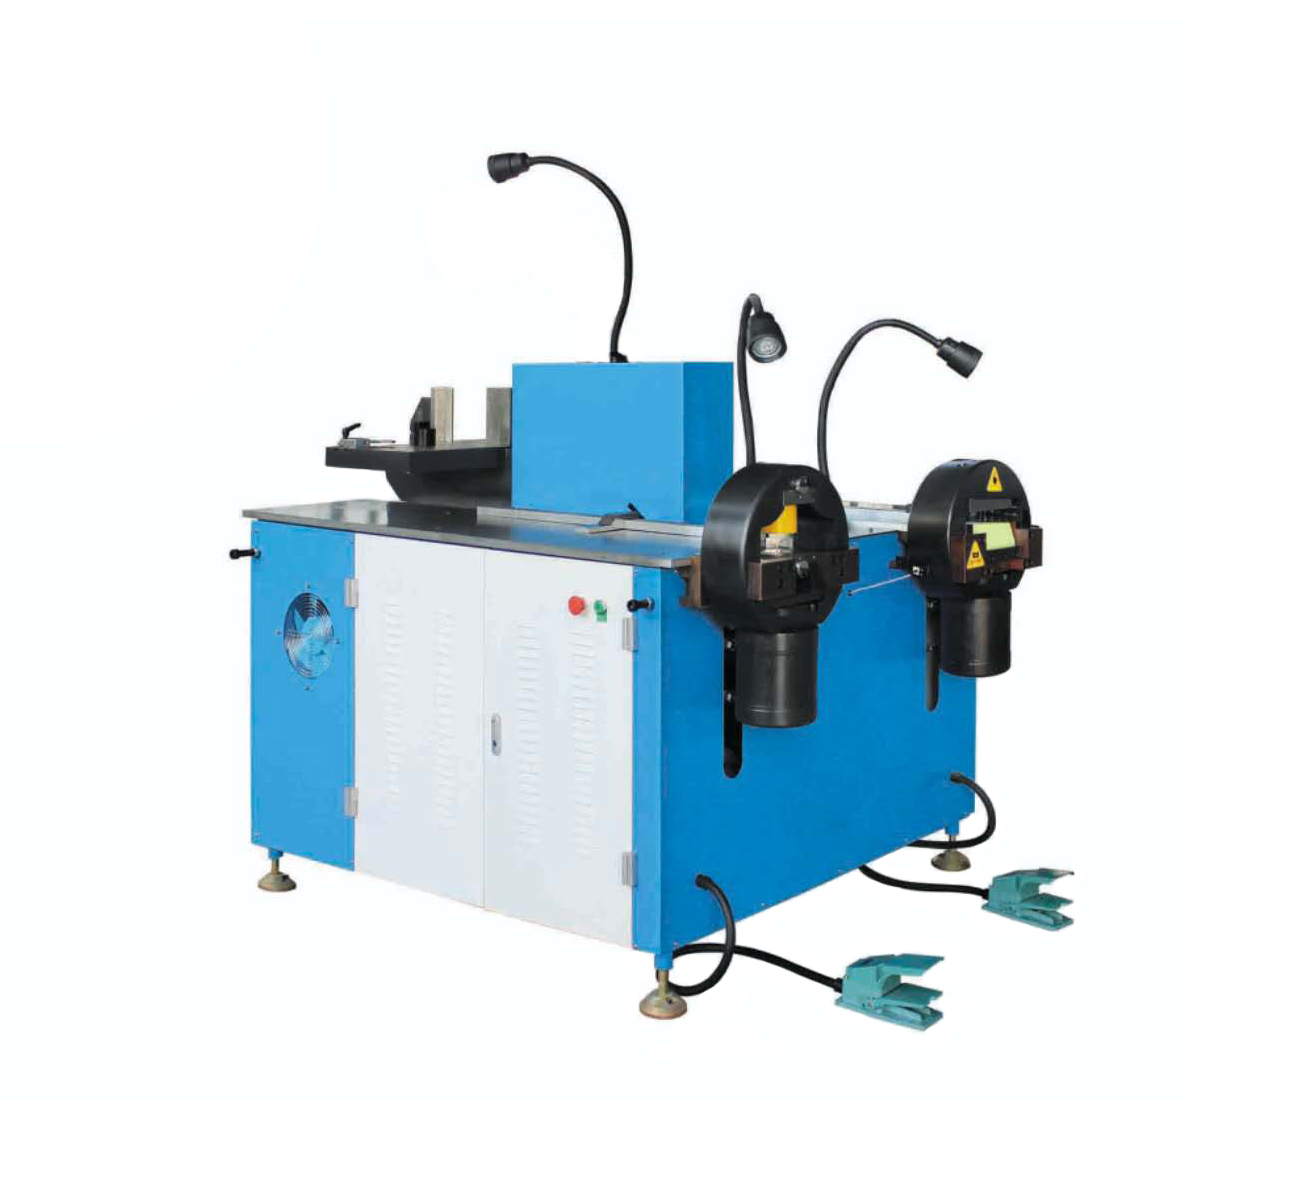 China Wholesale Ac Copper Pipe Bender Suppliers - Multifunction busbar 3 in 1 processing machine BM303-S-3  – Gaoji